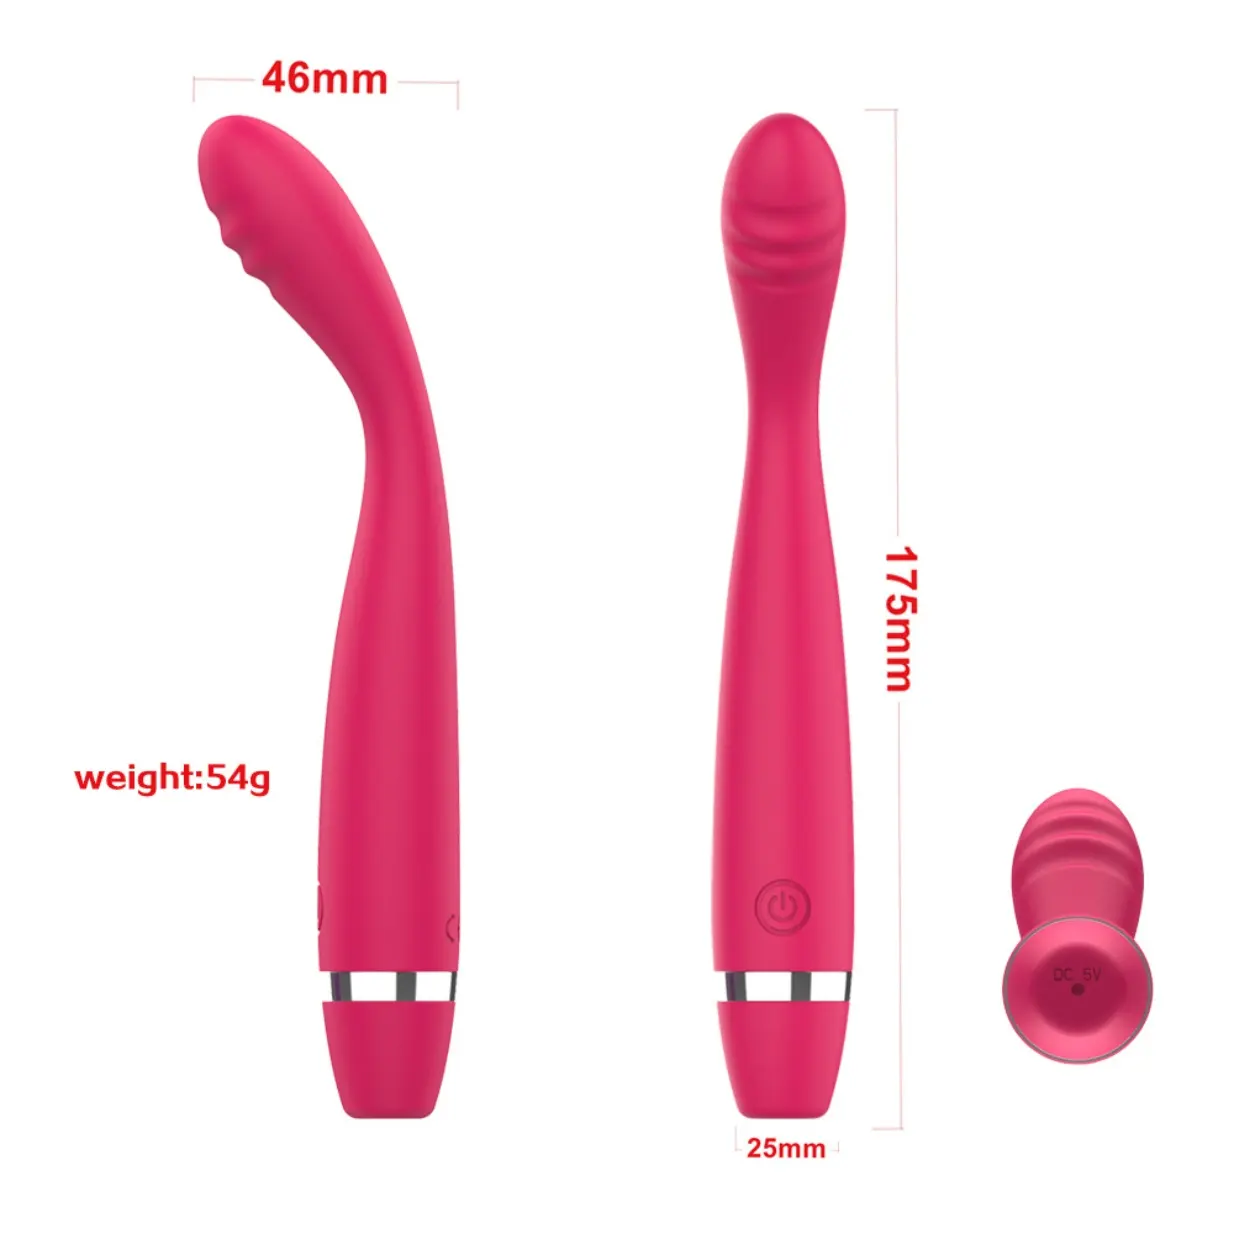 Hot selling penis vibrator sex toys wholesale texture anal clitoral stimulator G-spot vibrator adult and female toys